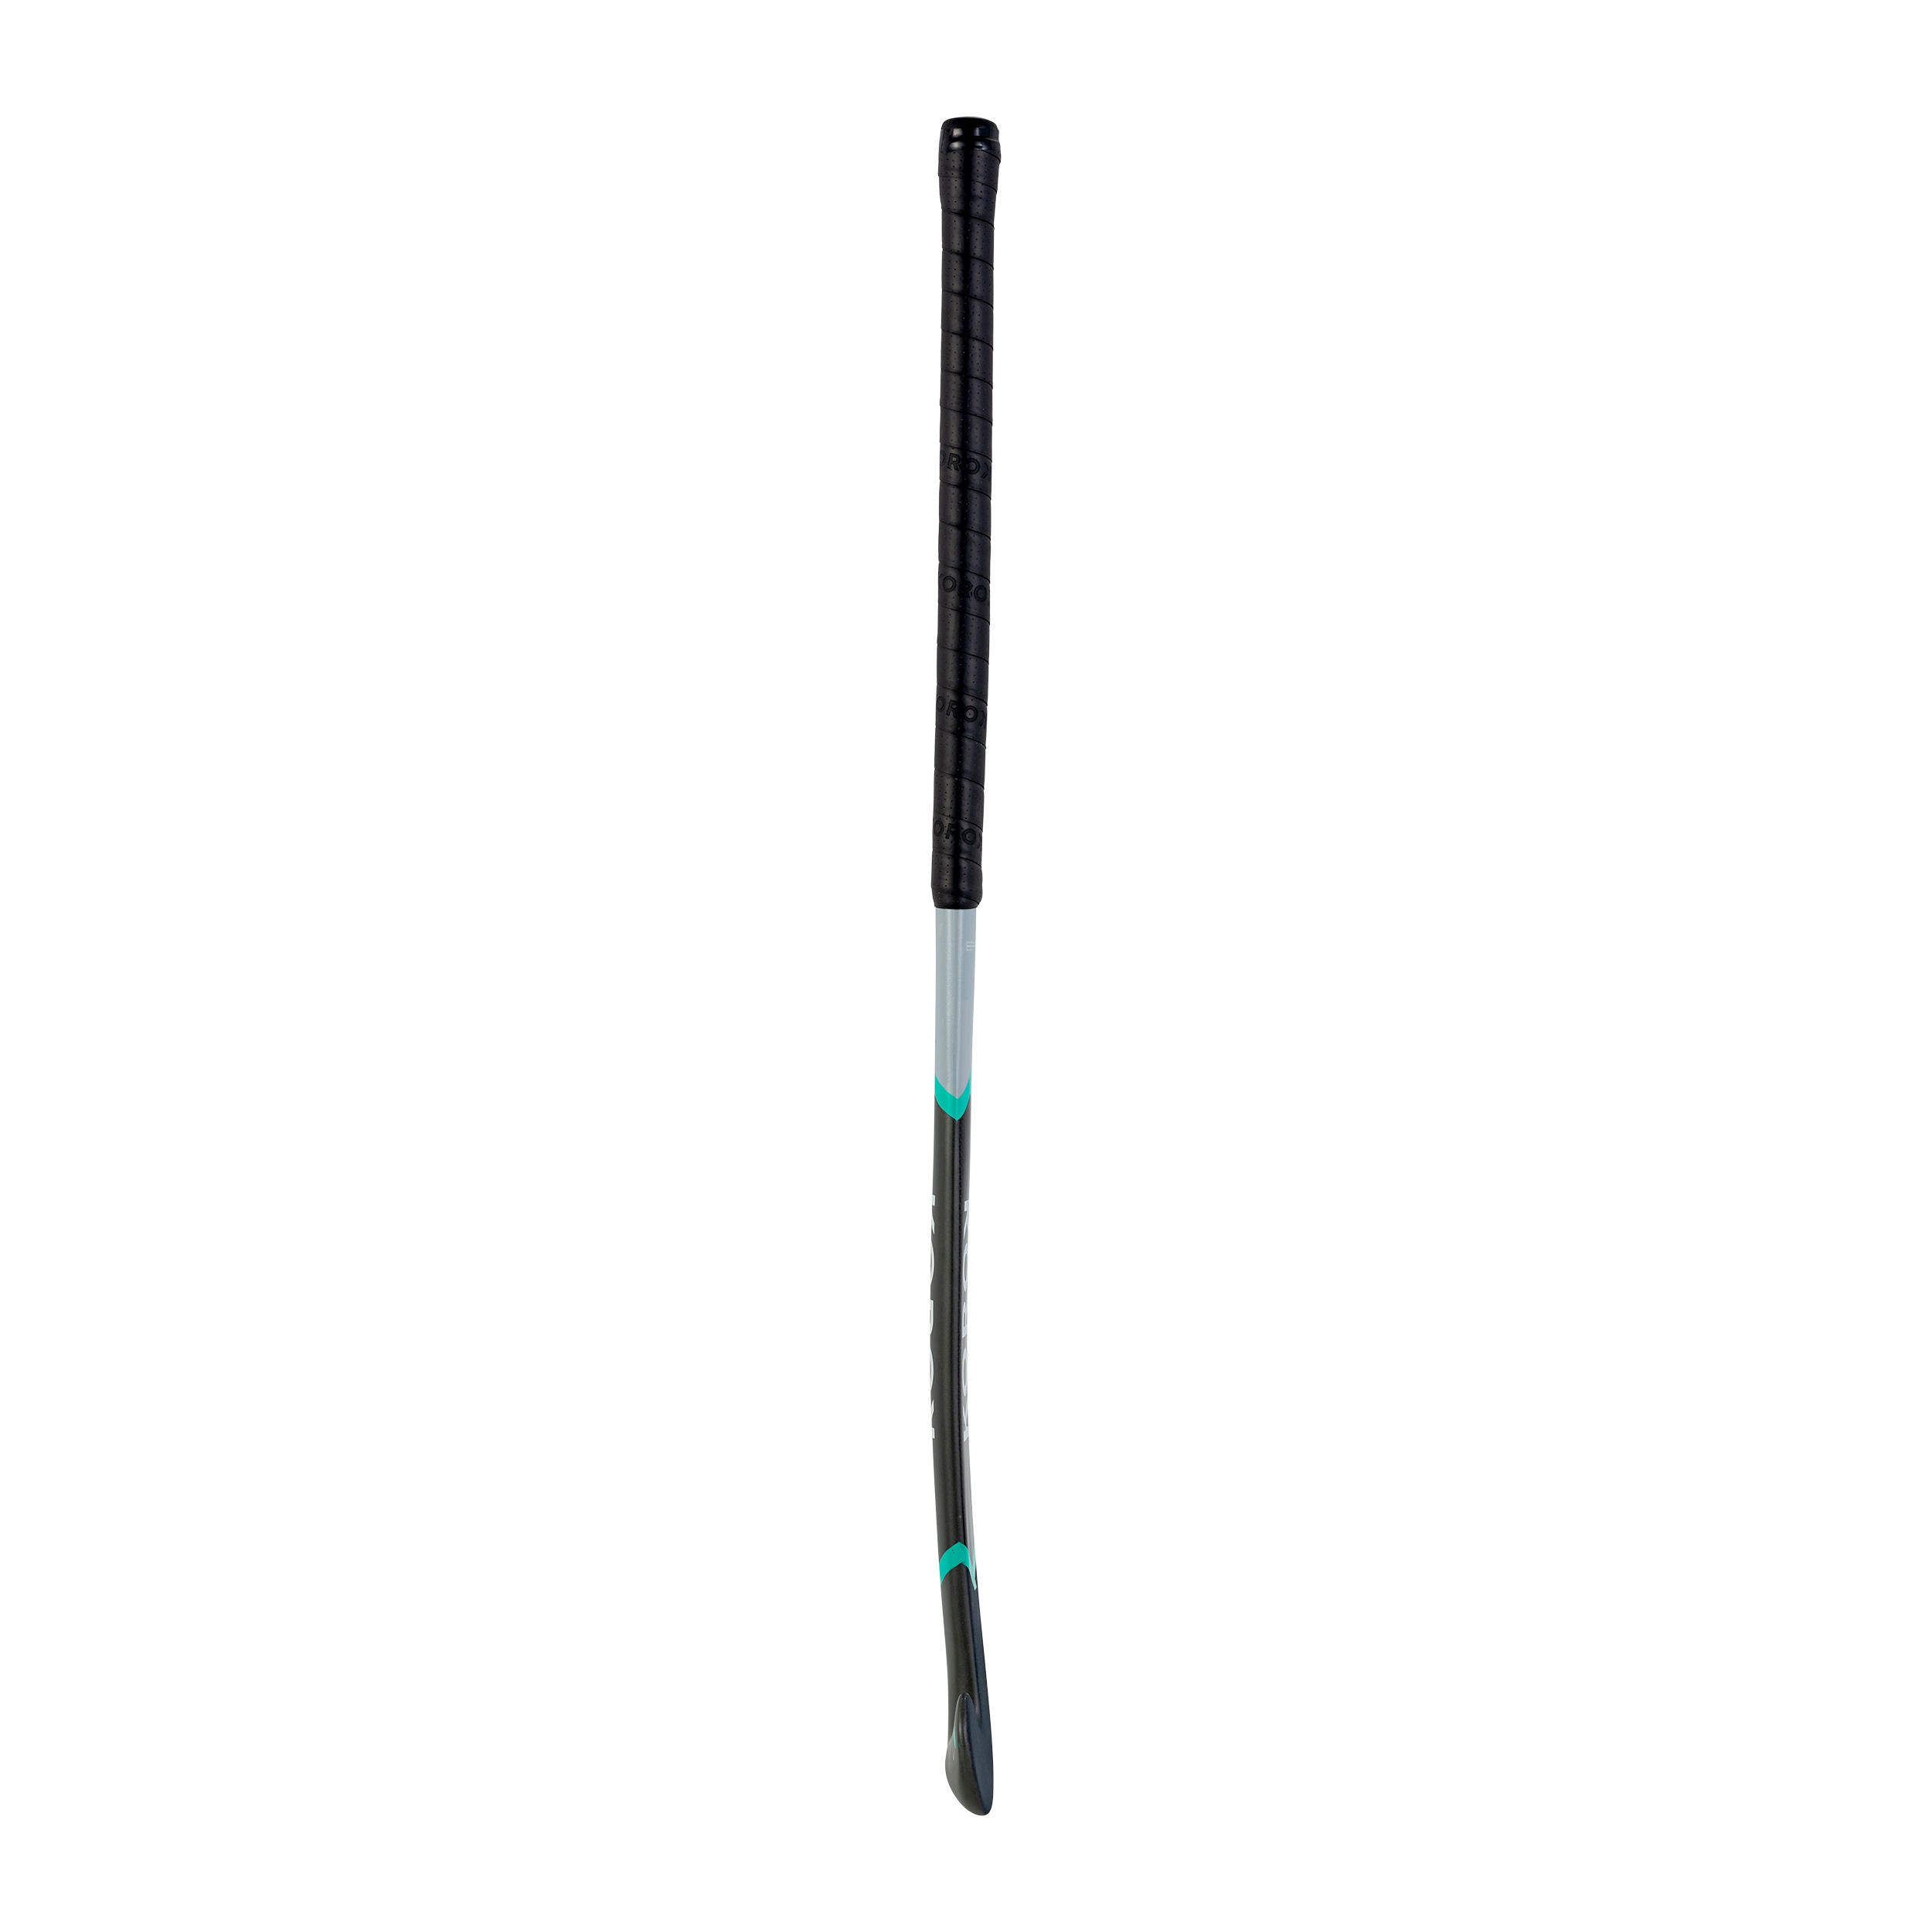 Adult Intermediate 30% Carbon Mid Bow Field Hockey Stick FH530 - Grey/Turquoise 9/12